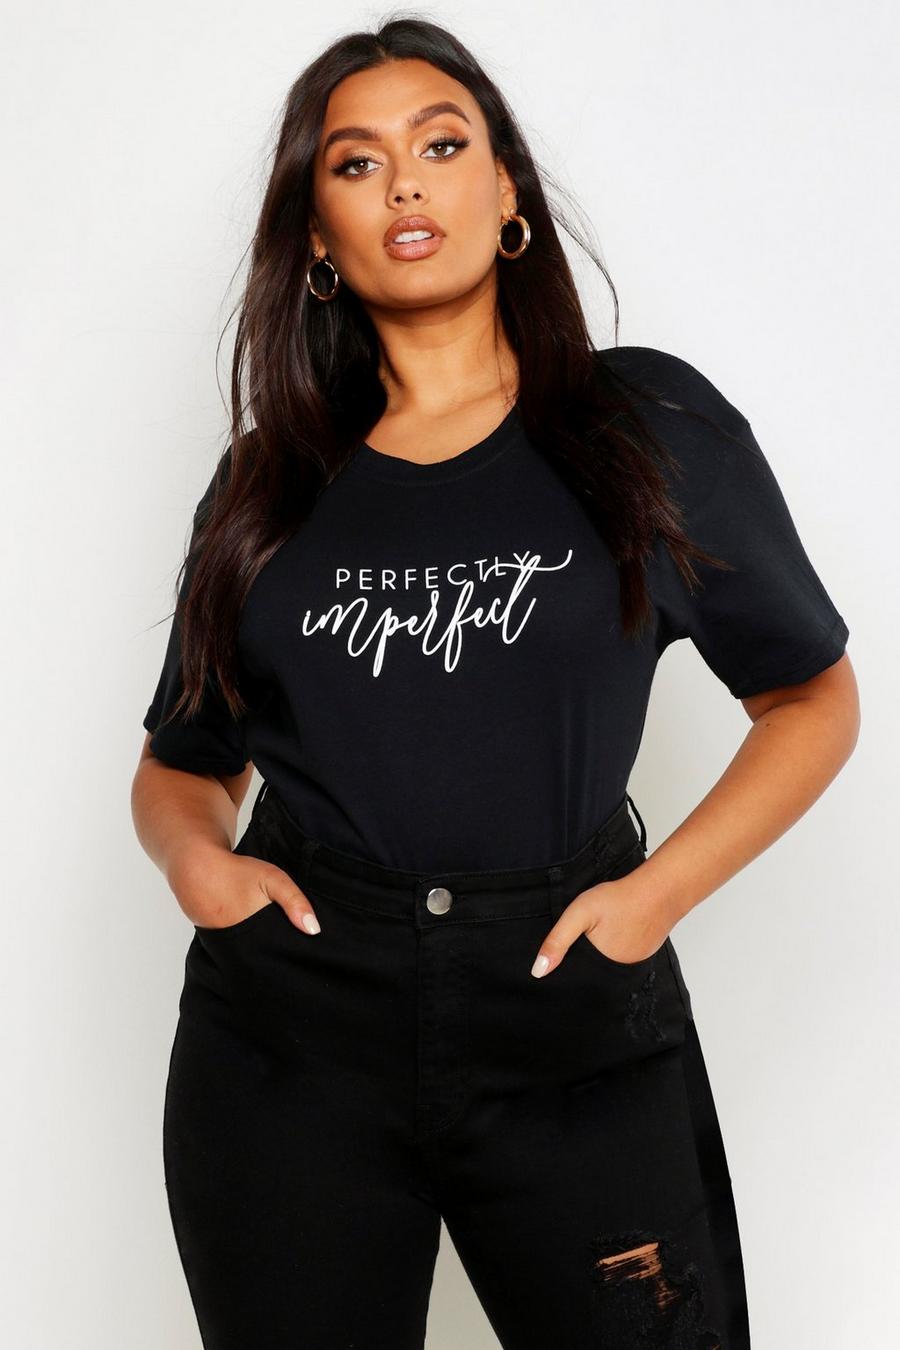 T-shirt Plus Size con slogan Perfectly Imperfect, Nero black image number 1